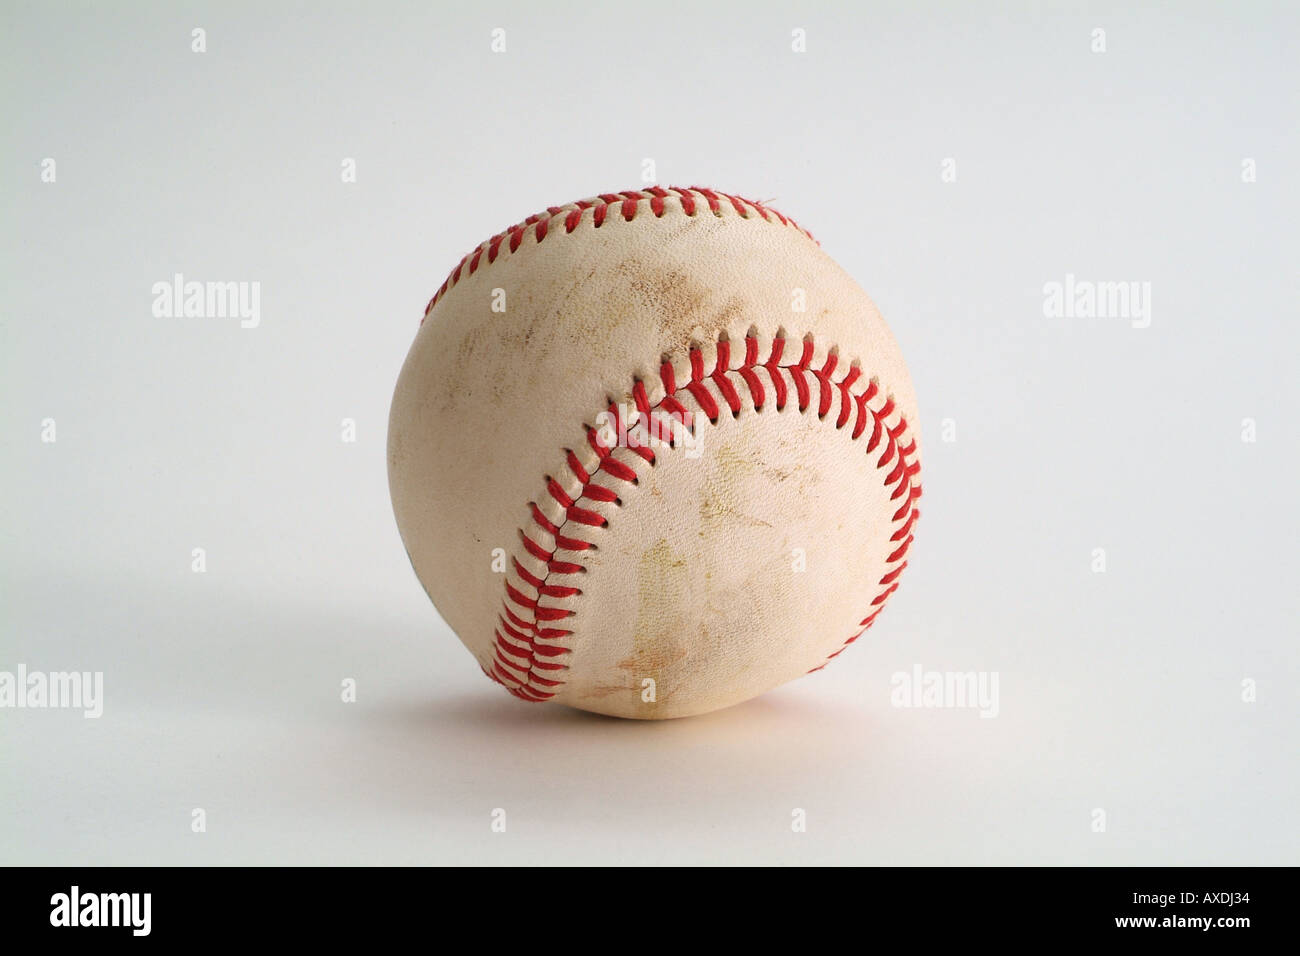 'Leather baseball' with red stitching slightly dirty as is used in American Baseball Games white background horizontal Stock Photo